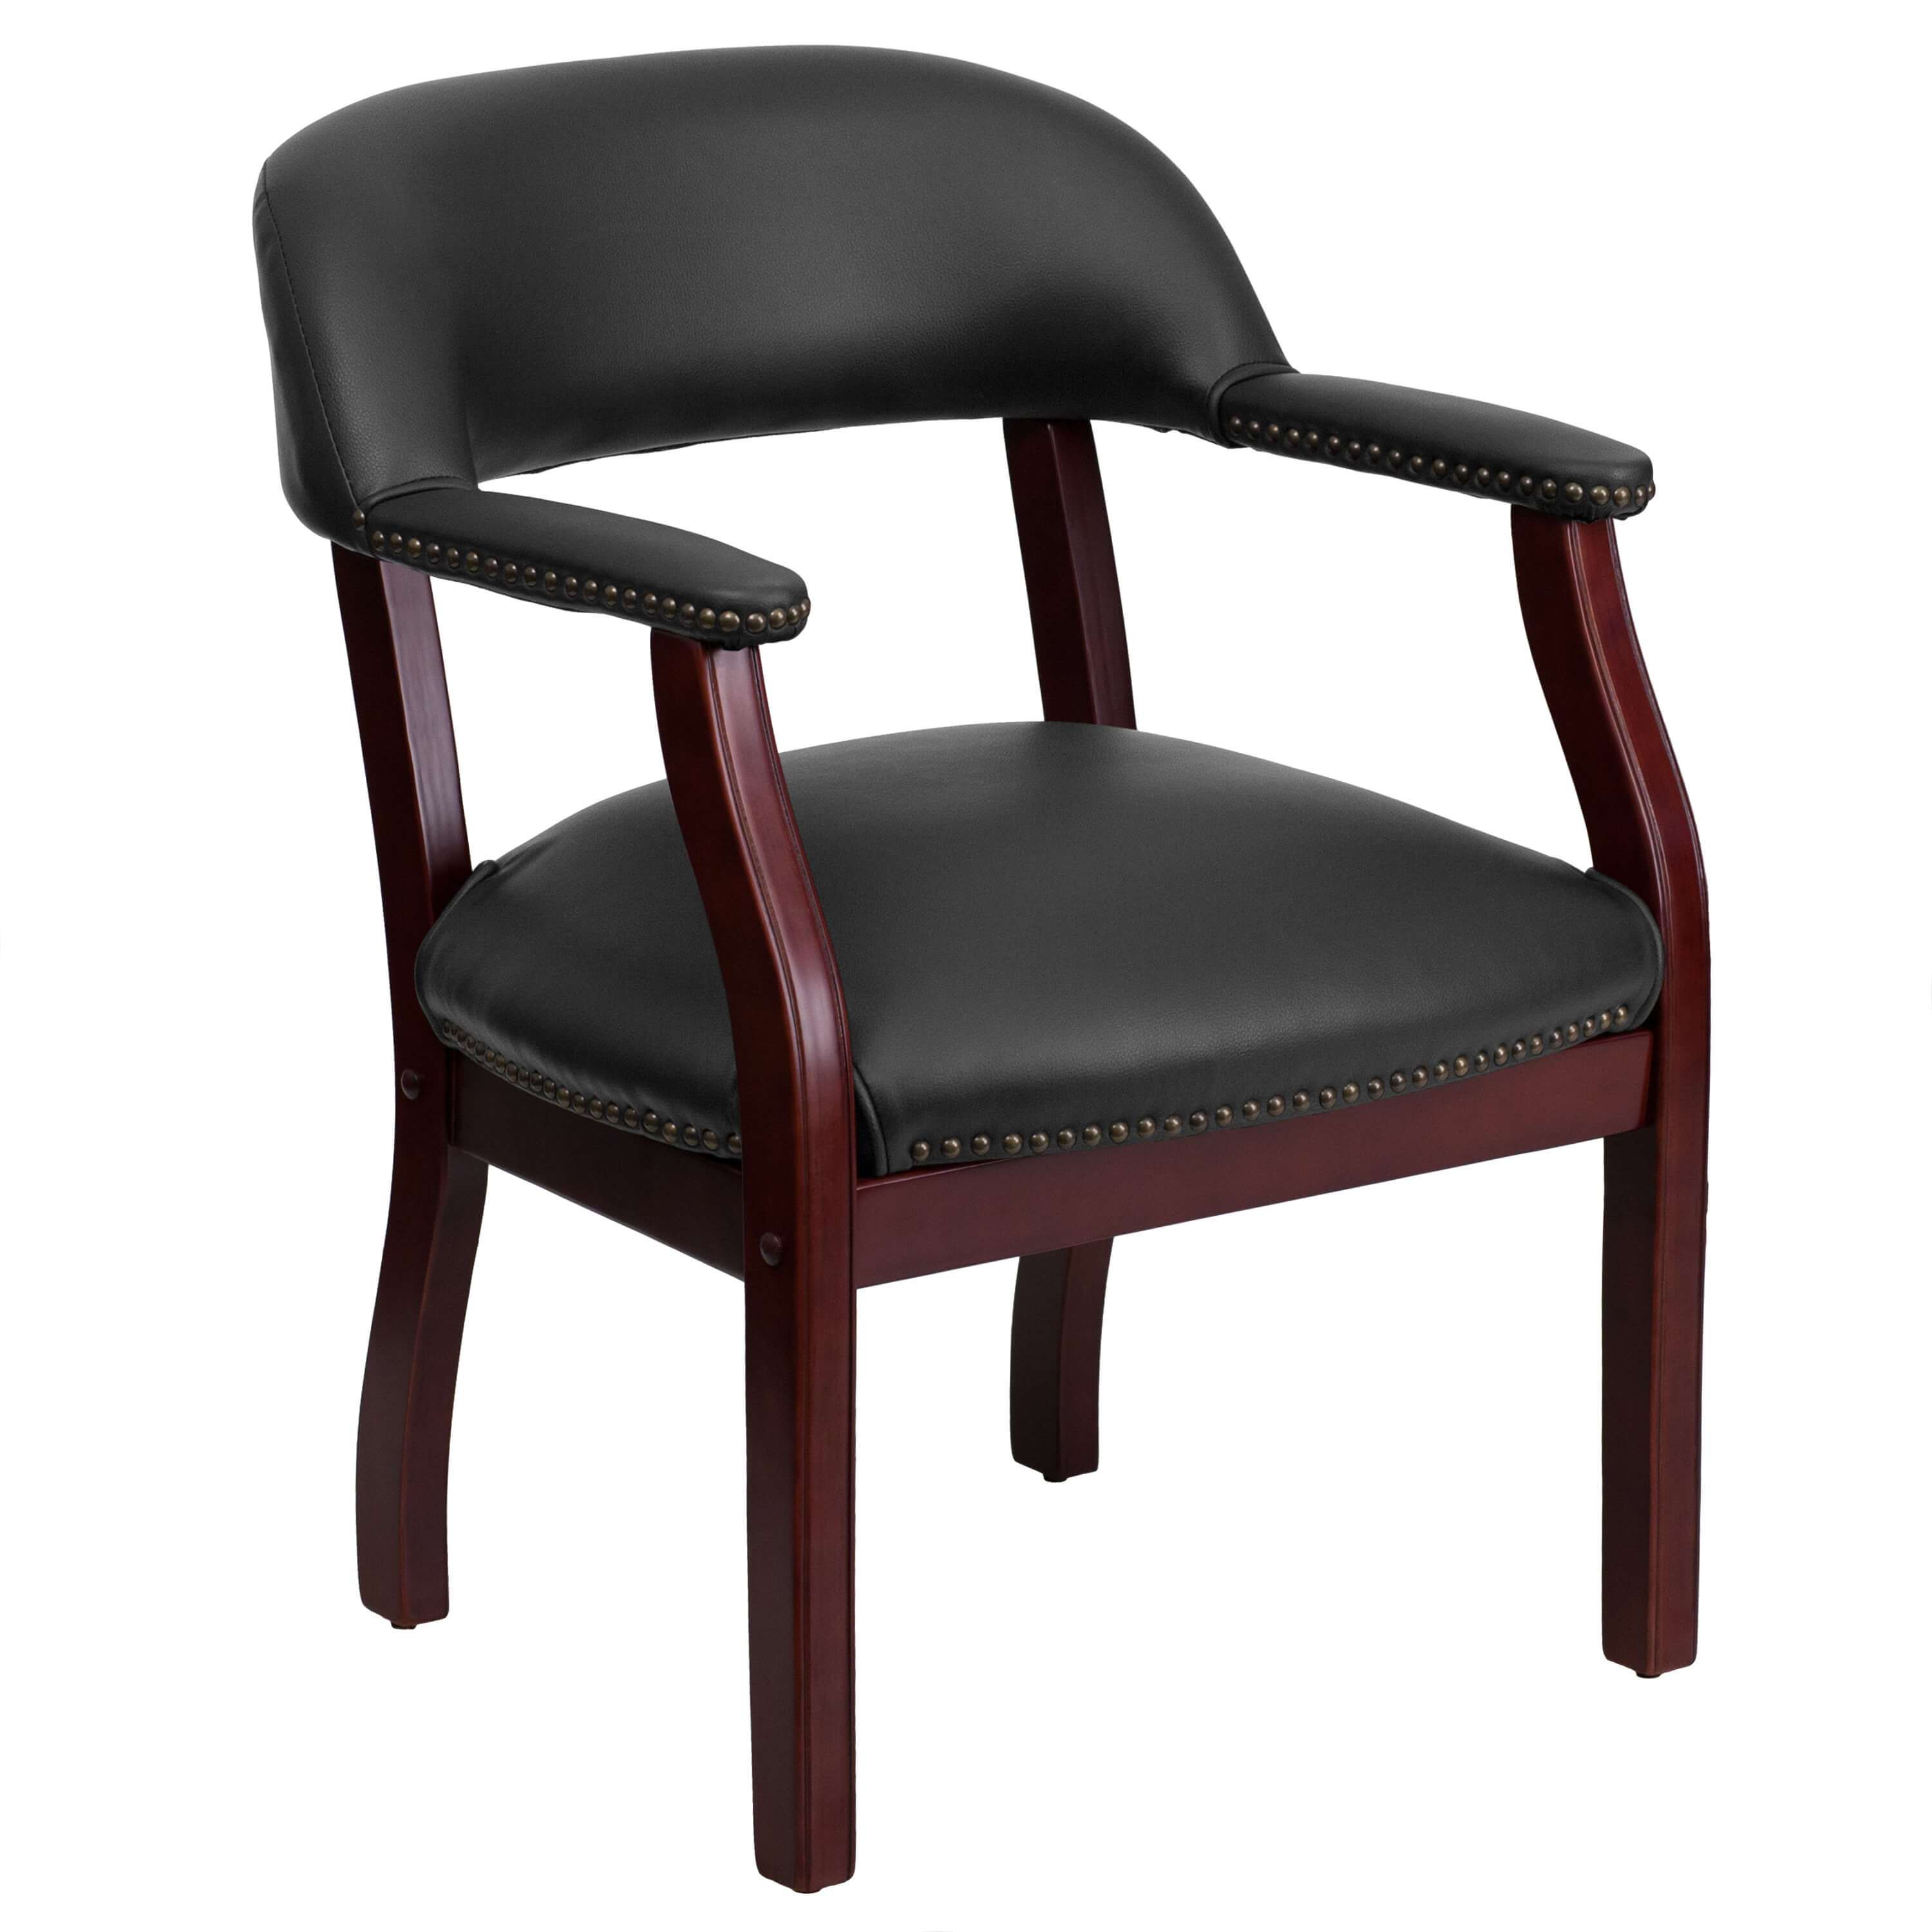 Side chairs with arms CUB B Z105 BLACK GG FLA